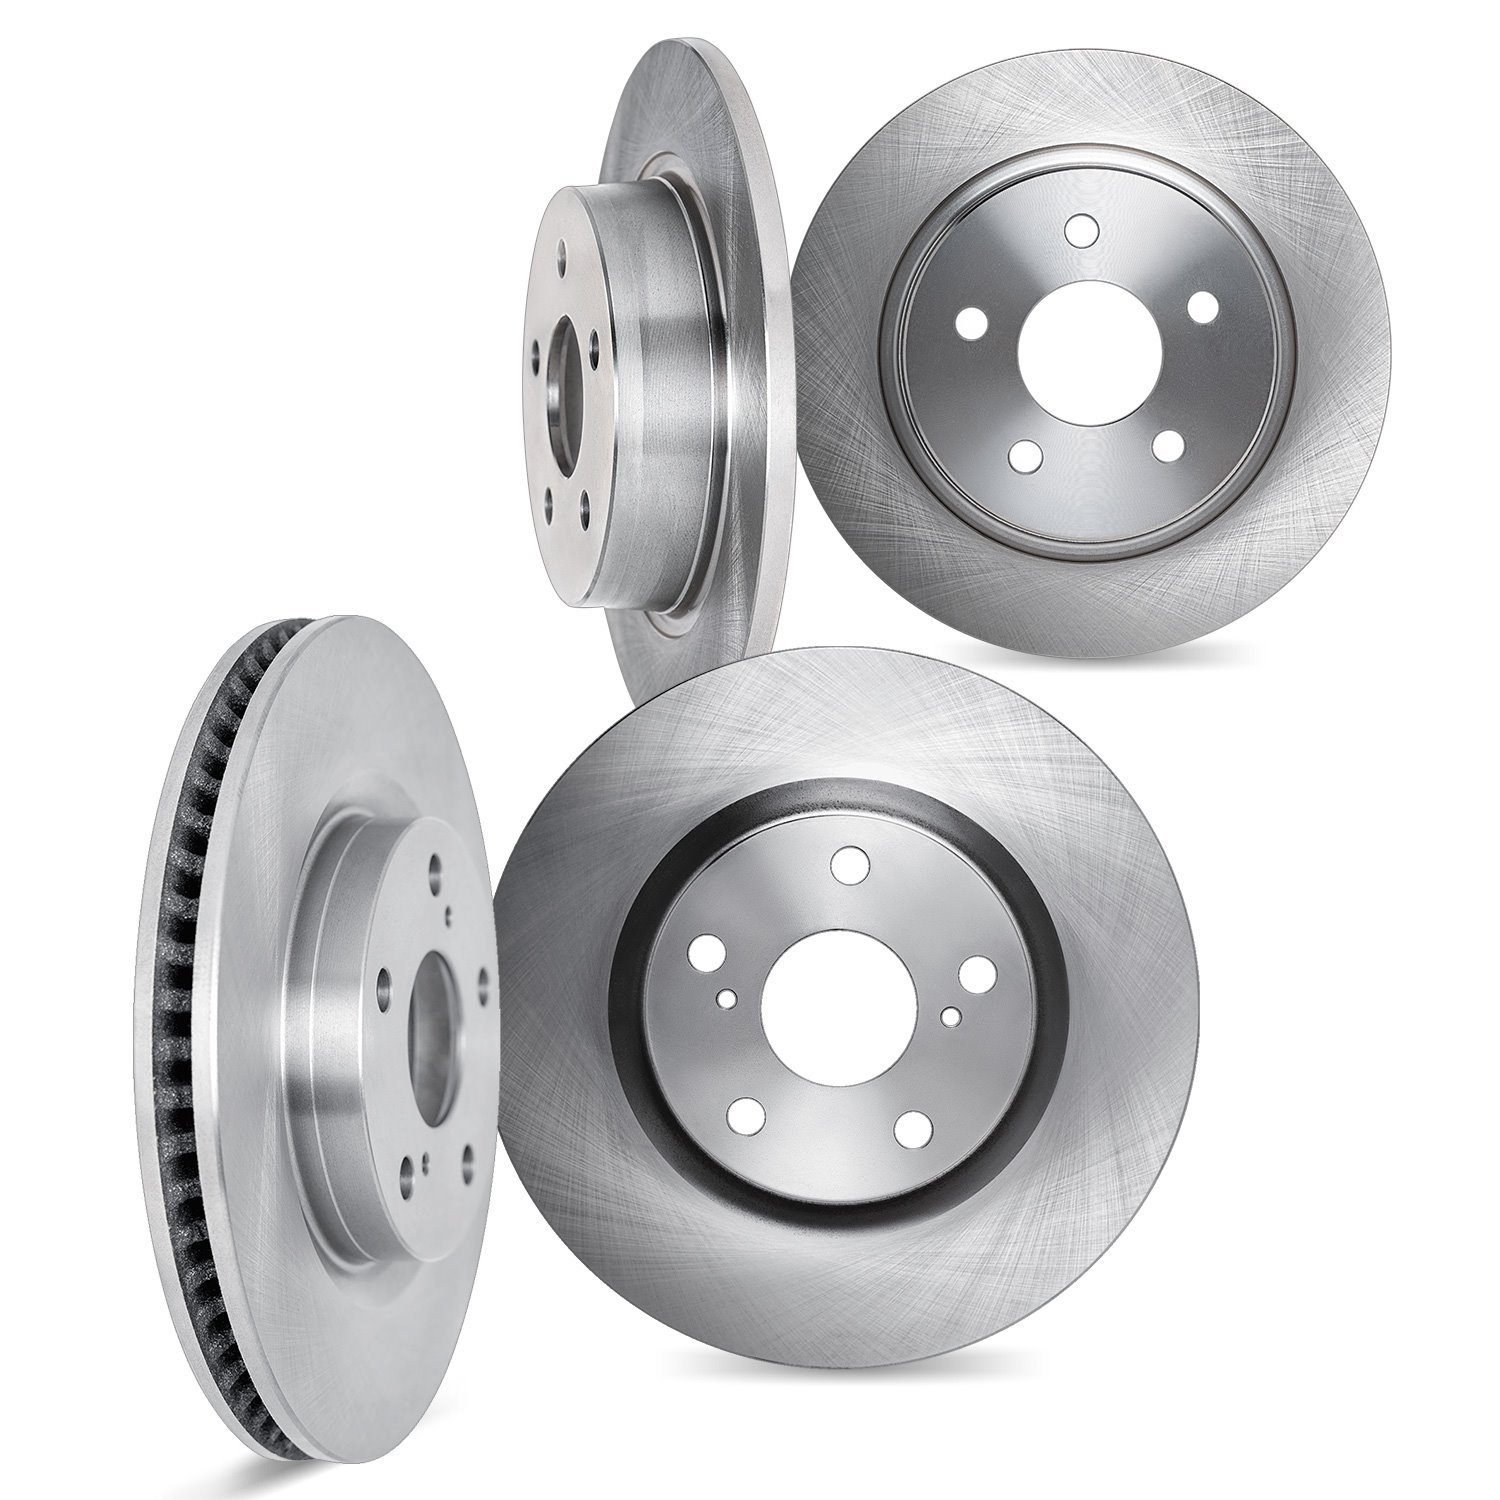 6004-74058 Brake Rotors, Fits Select Multiple Makes/Models, Position: Front and Rear